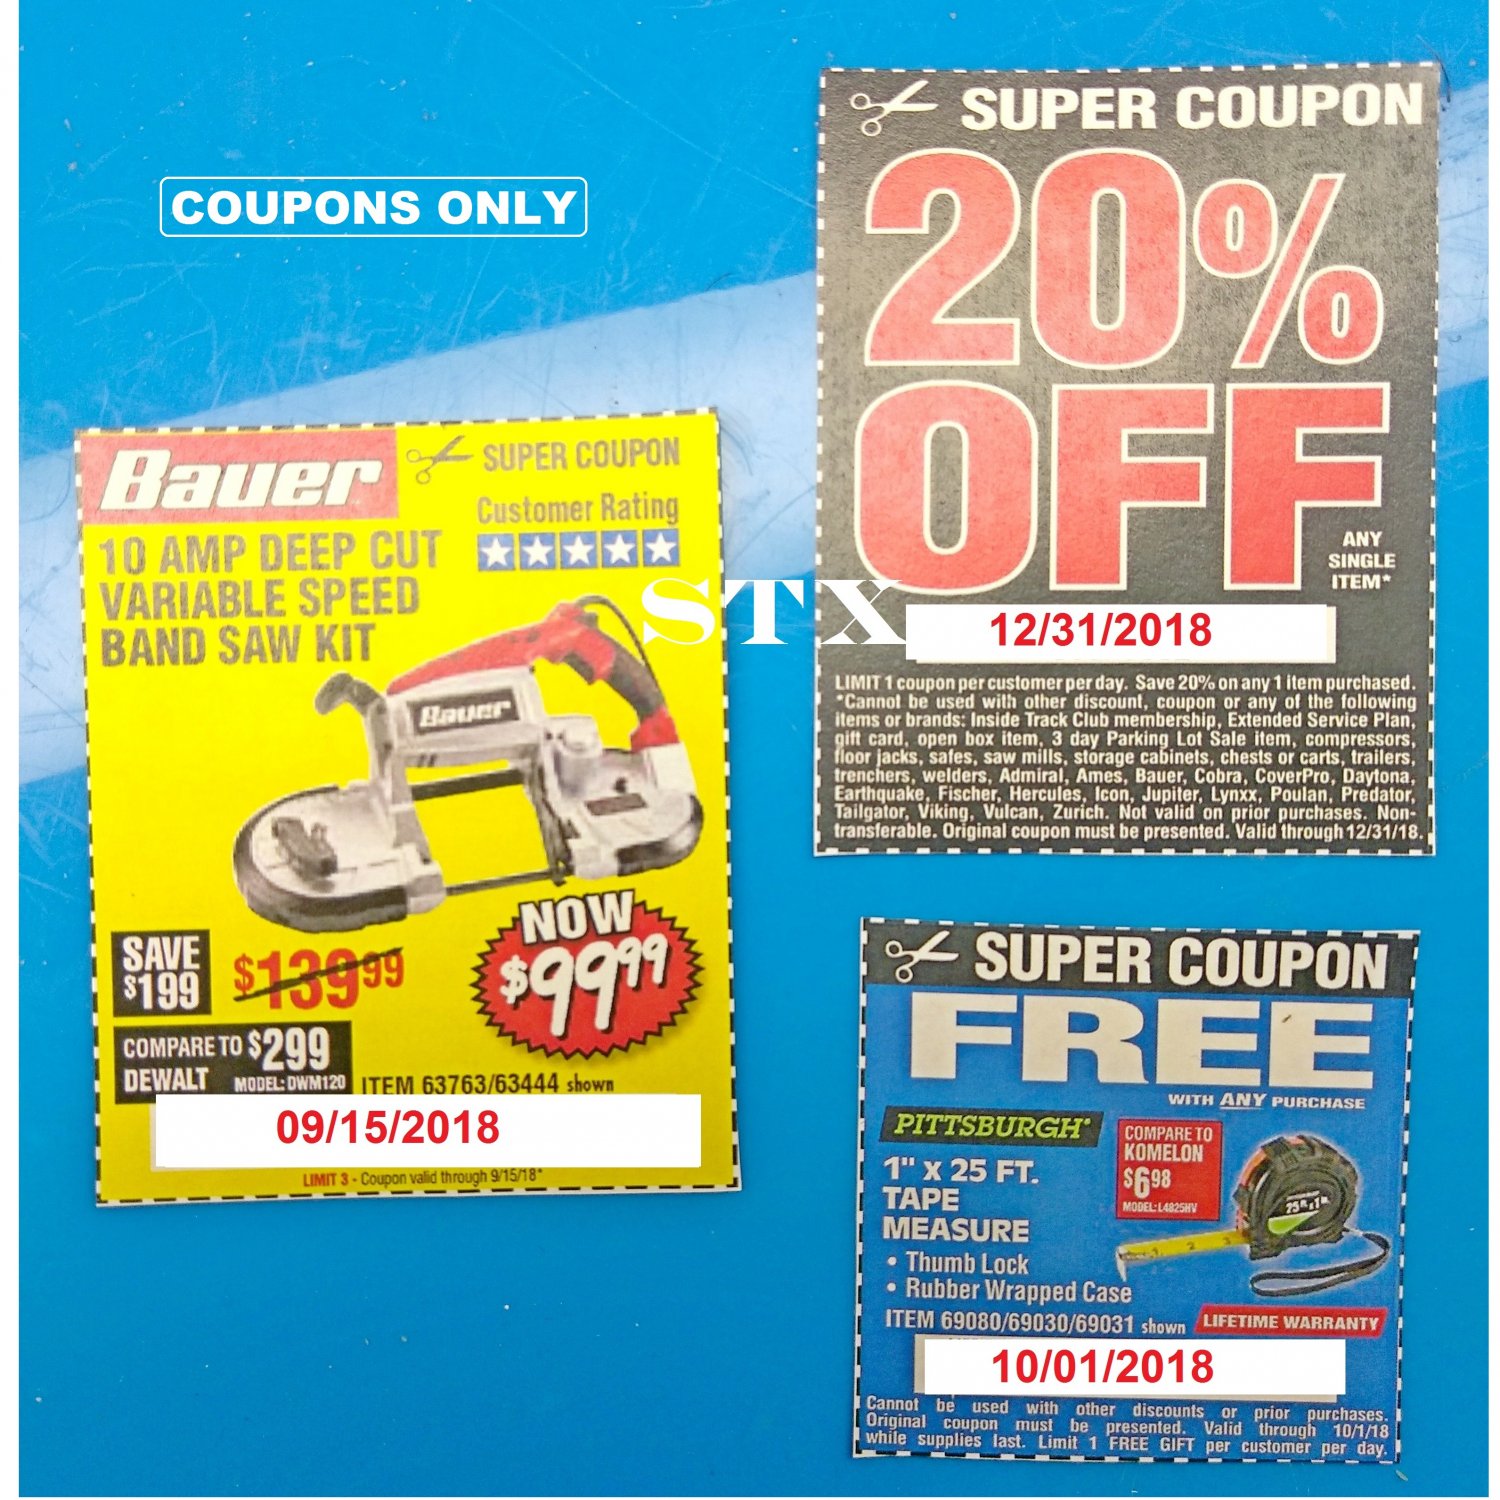 99.99 10Amp Band Saw Coupon Harbor Freight + 20 Off + 25FT Tape